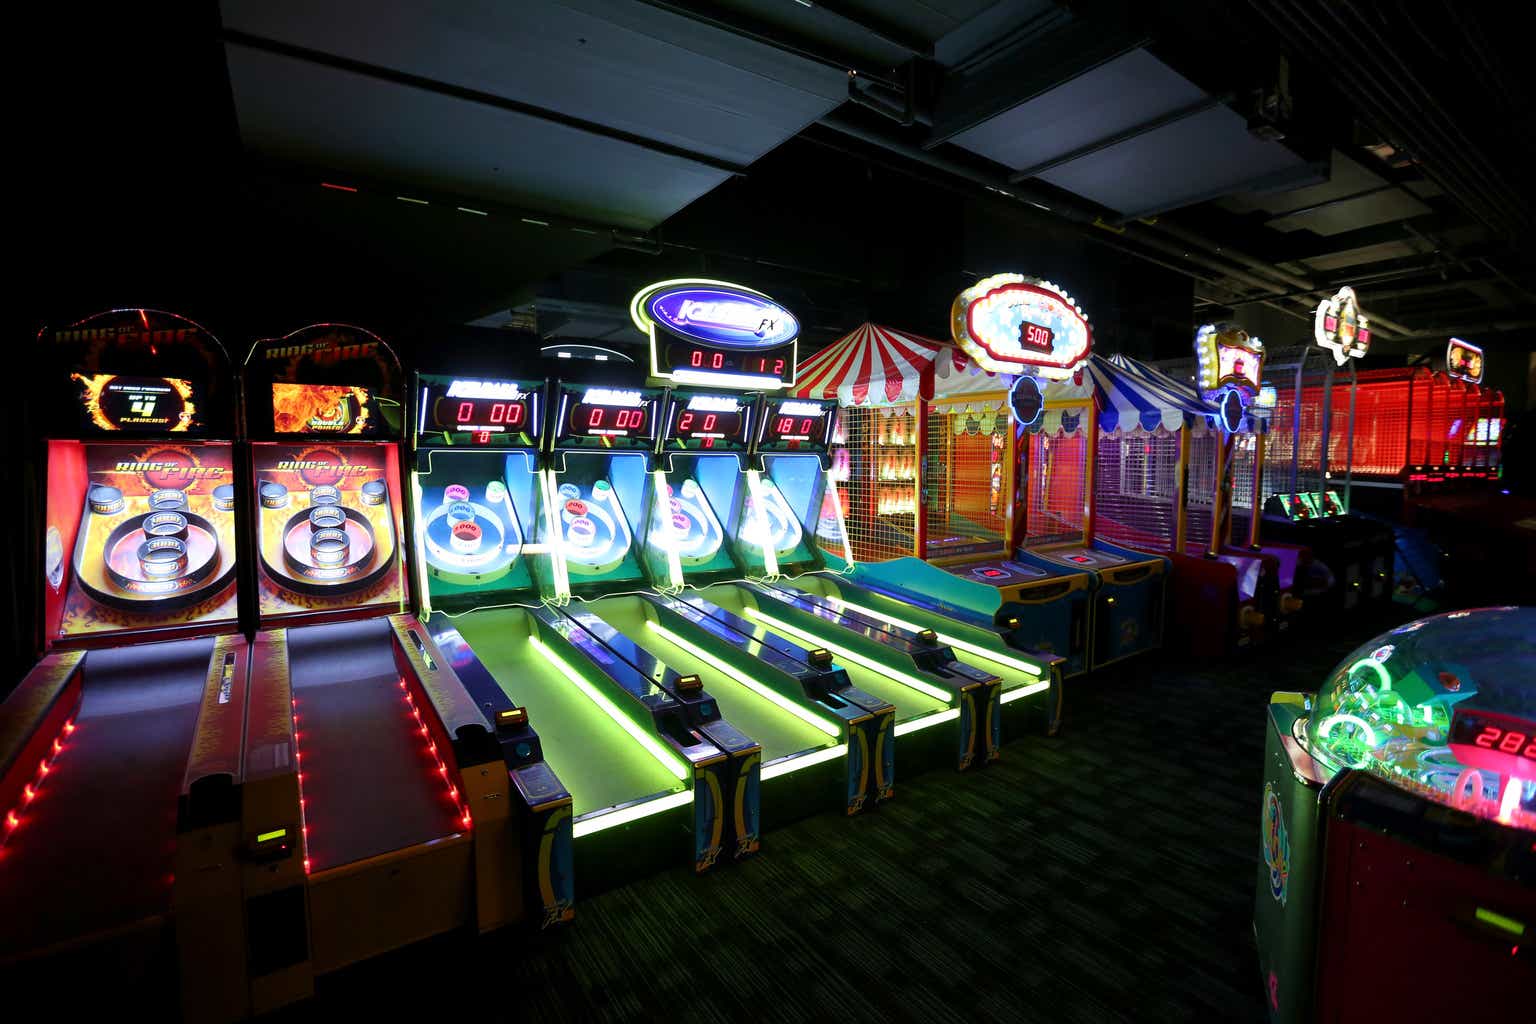 Dave and Buster's earnings call does not reflect its future, this